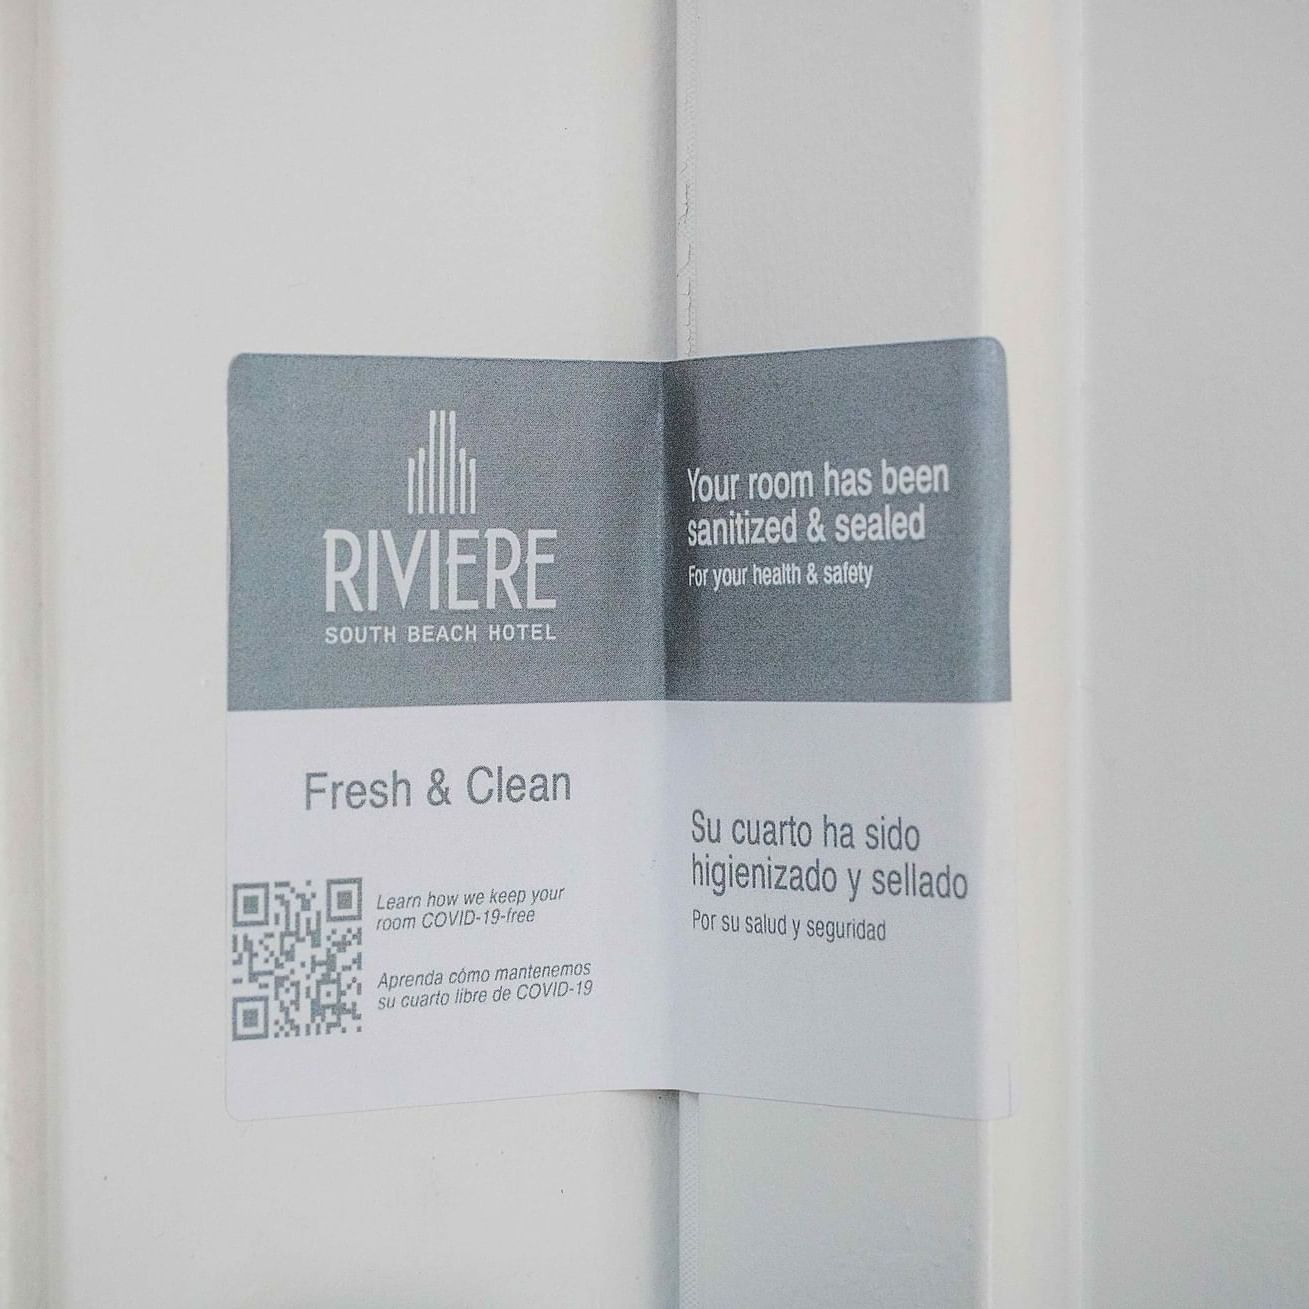 Cleaning guidelines of a room at Riviere South Beach Hotel